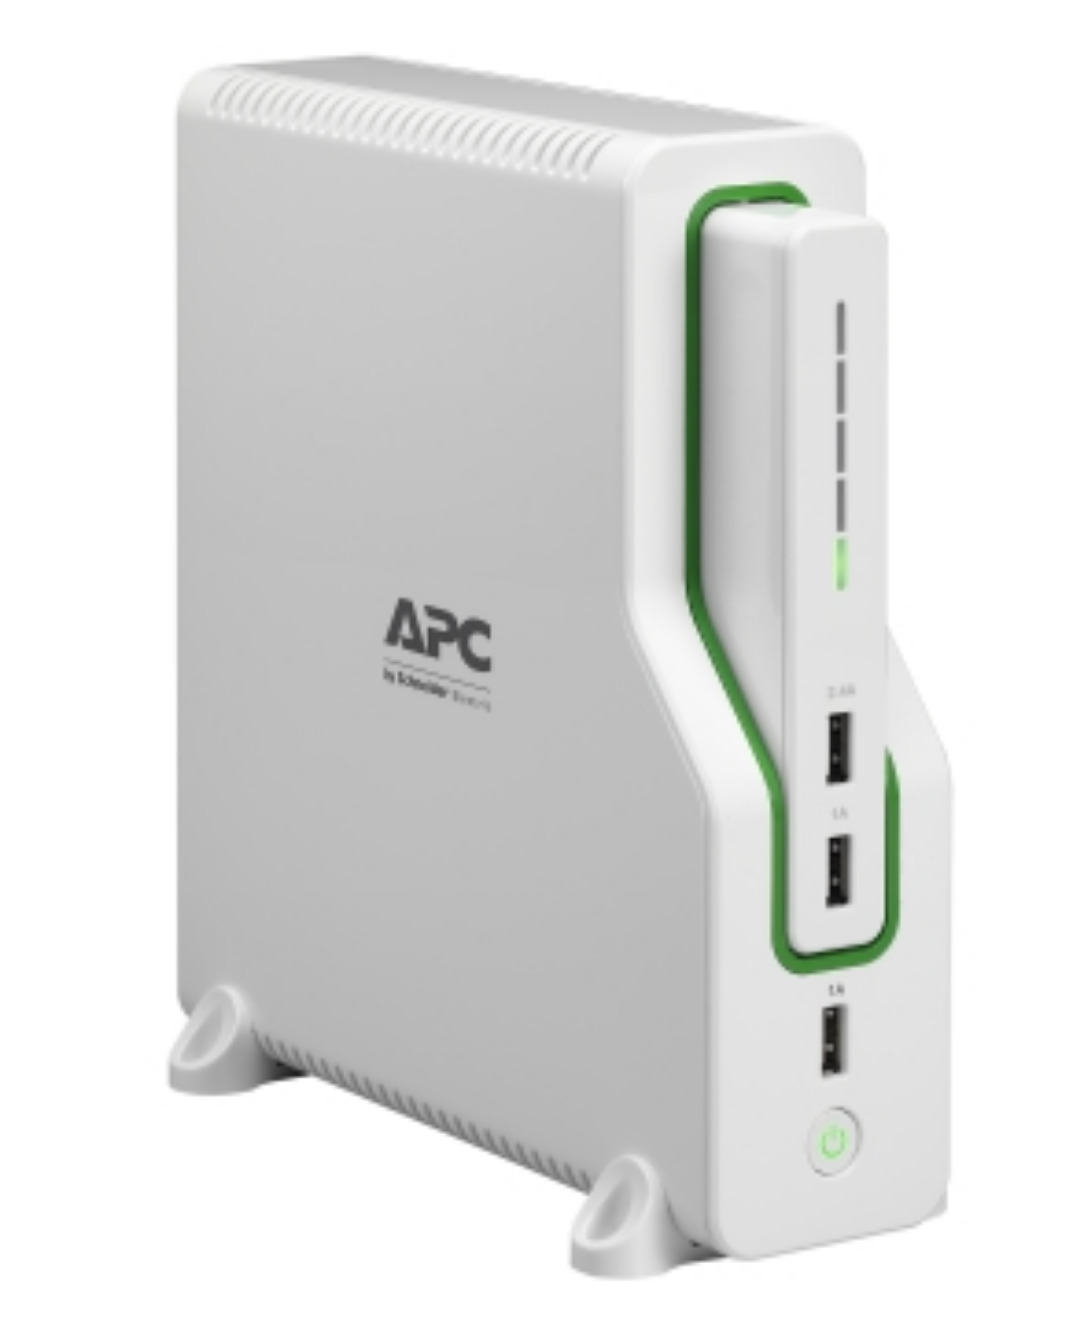 APC Back-UPS Connect Mobile Power Pack, USB Charging Ports